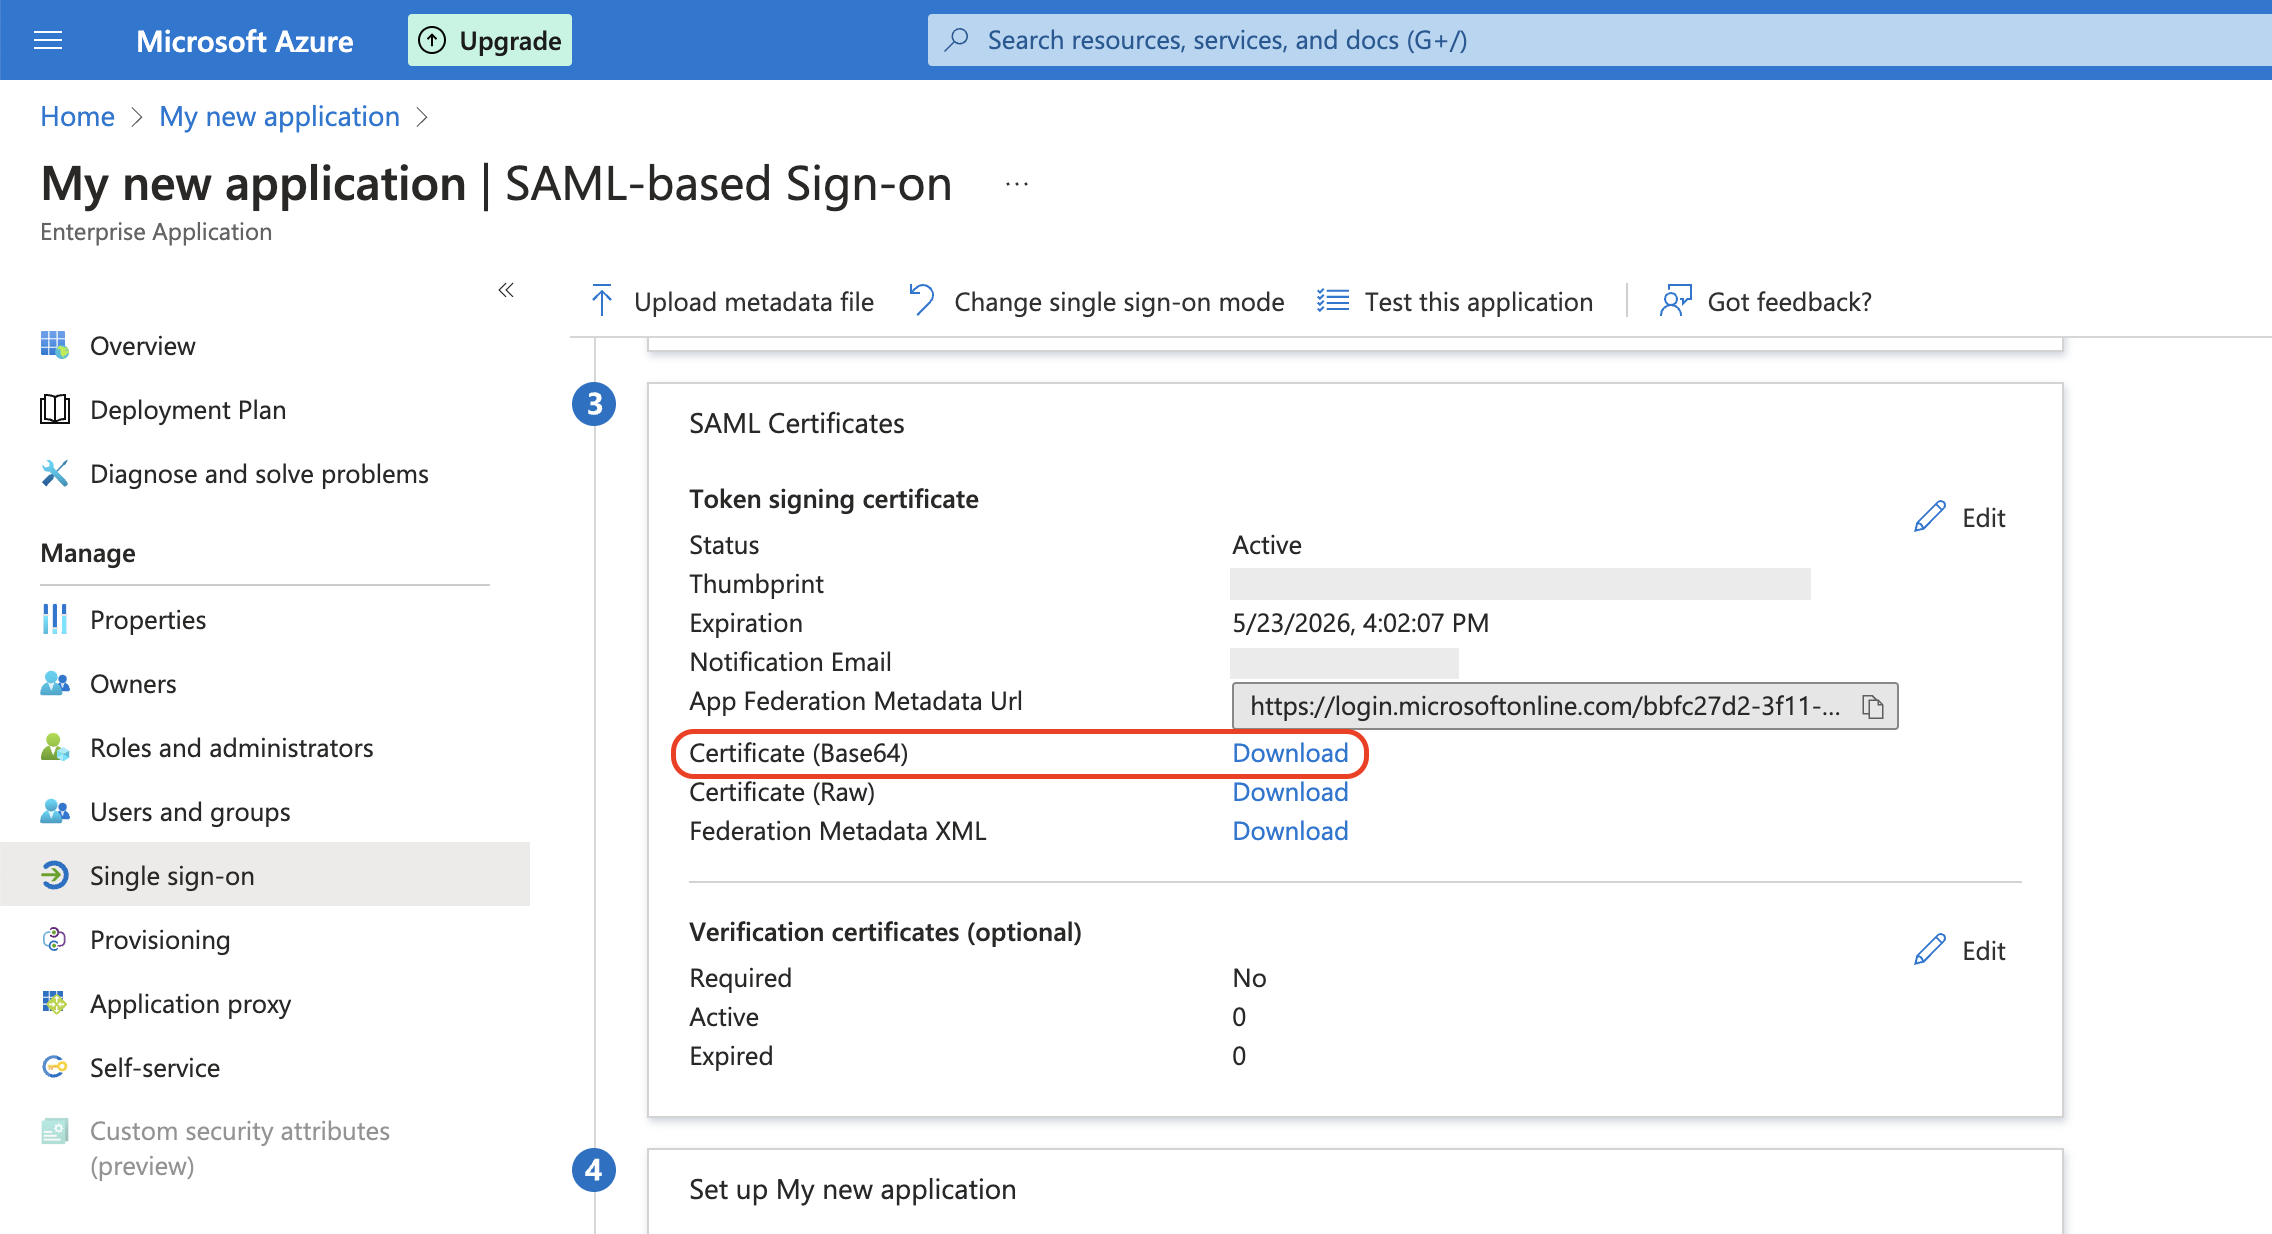 Download certificate button in Azure